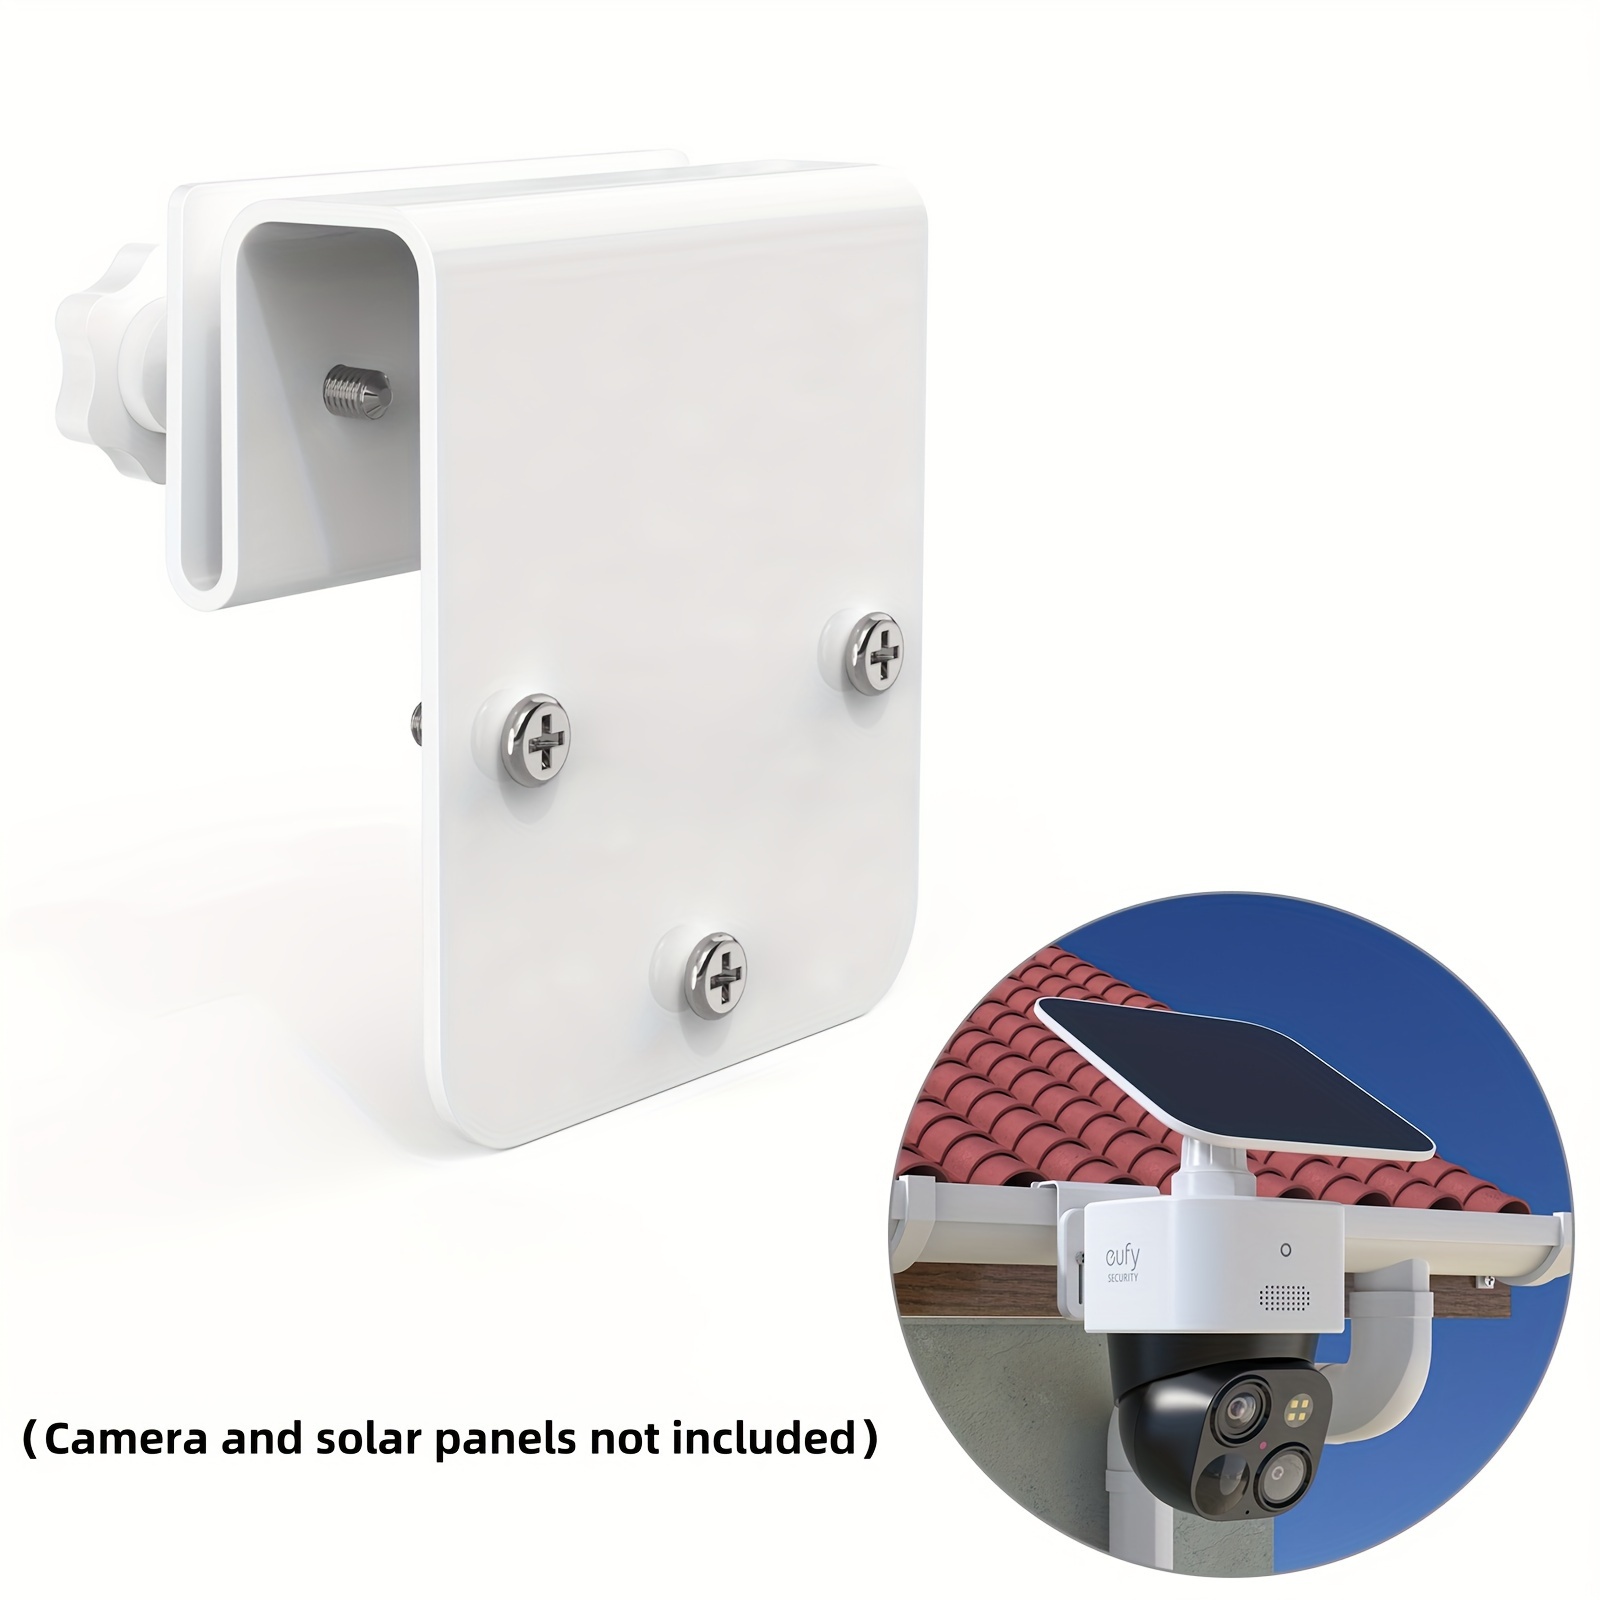 

Gutter Mount Bracket Compatible With Eufy Security Solocam S340, Solar Security Camera, Camera And Solar Panels Not Included